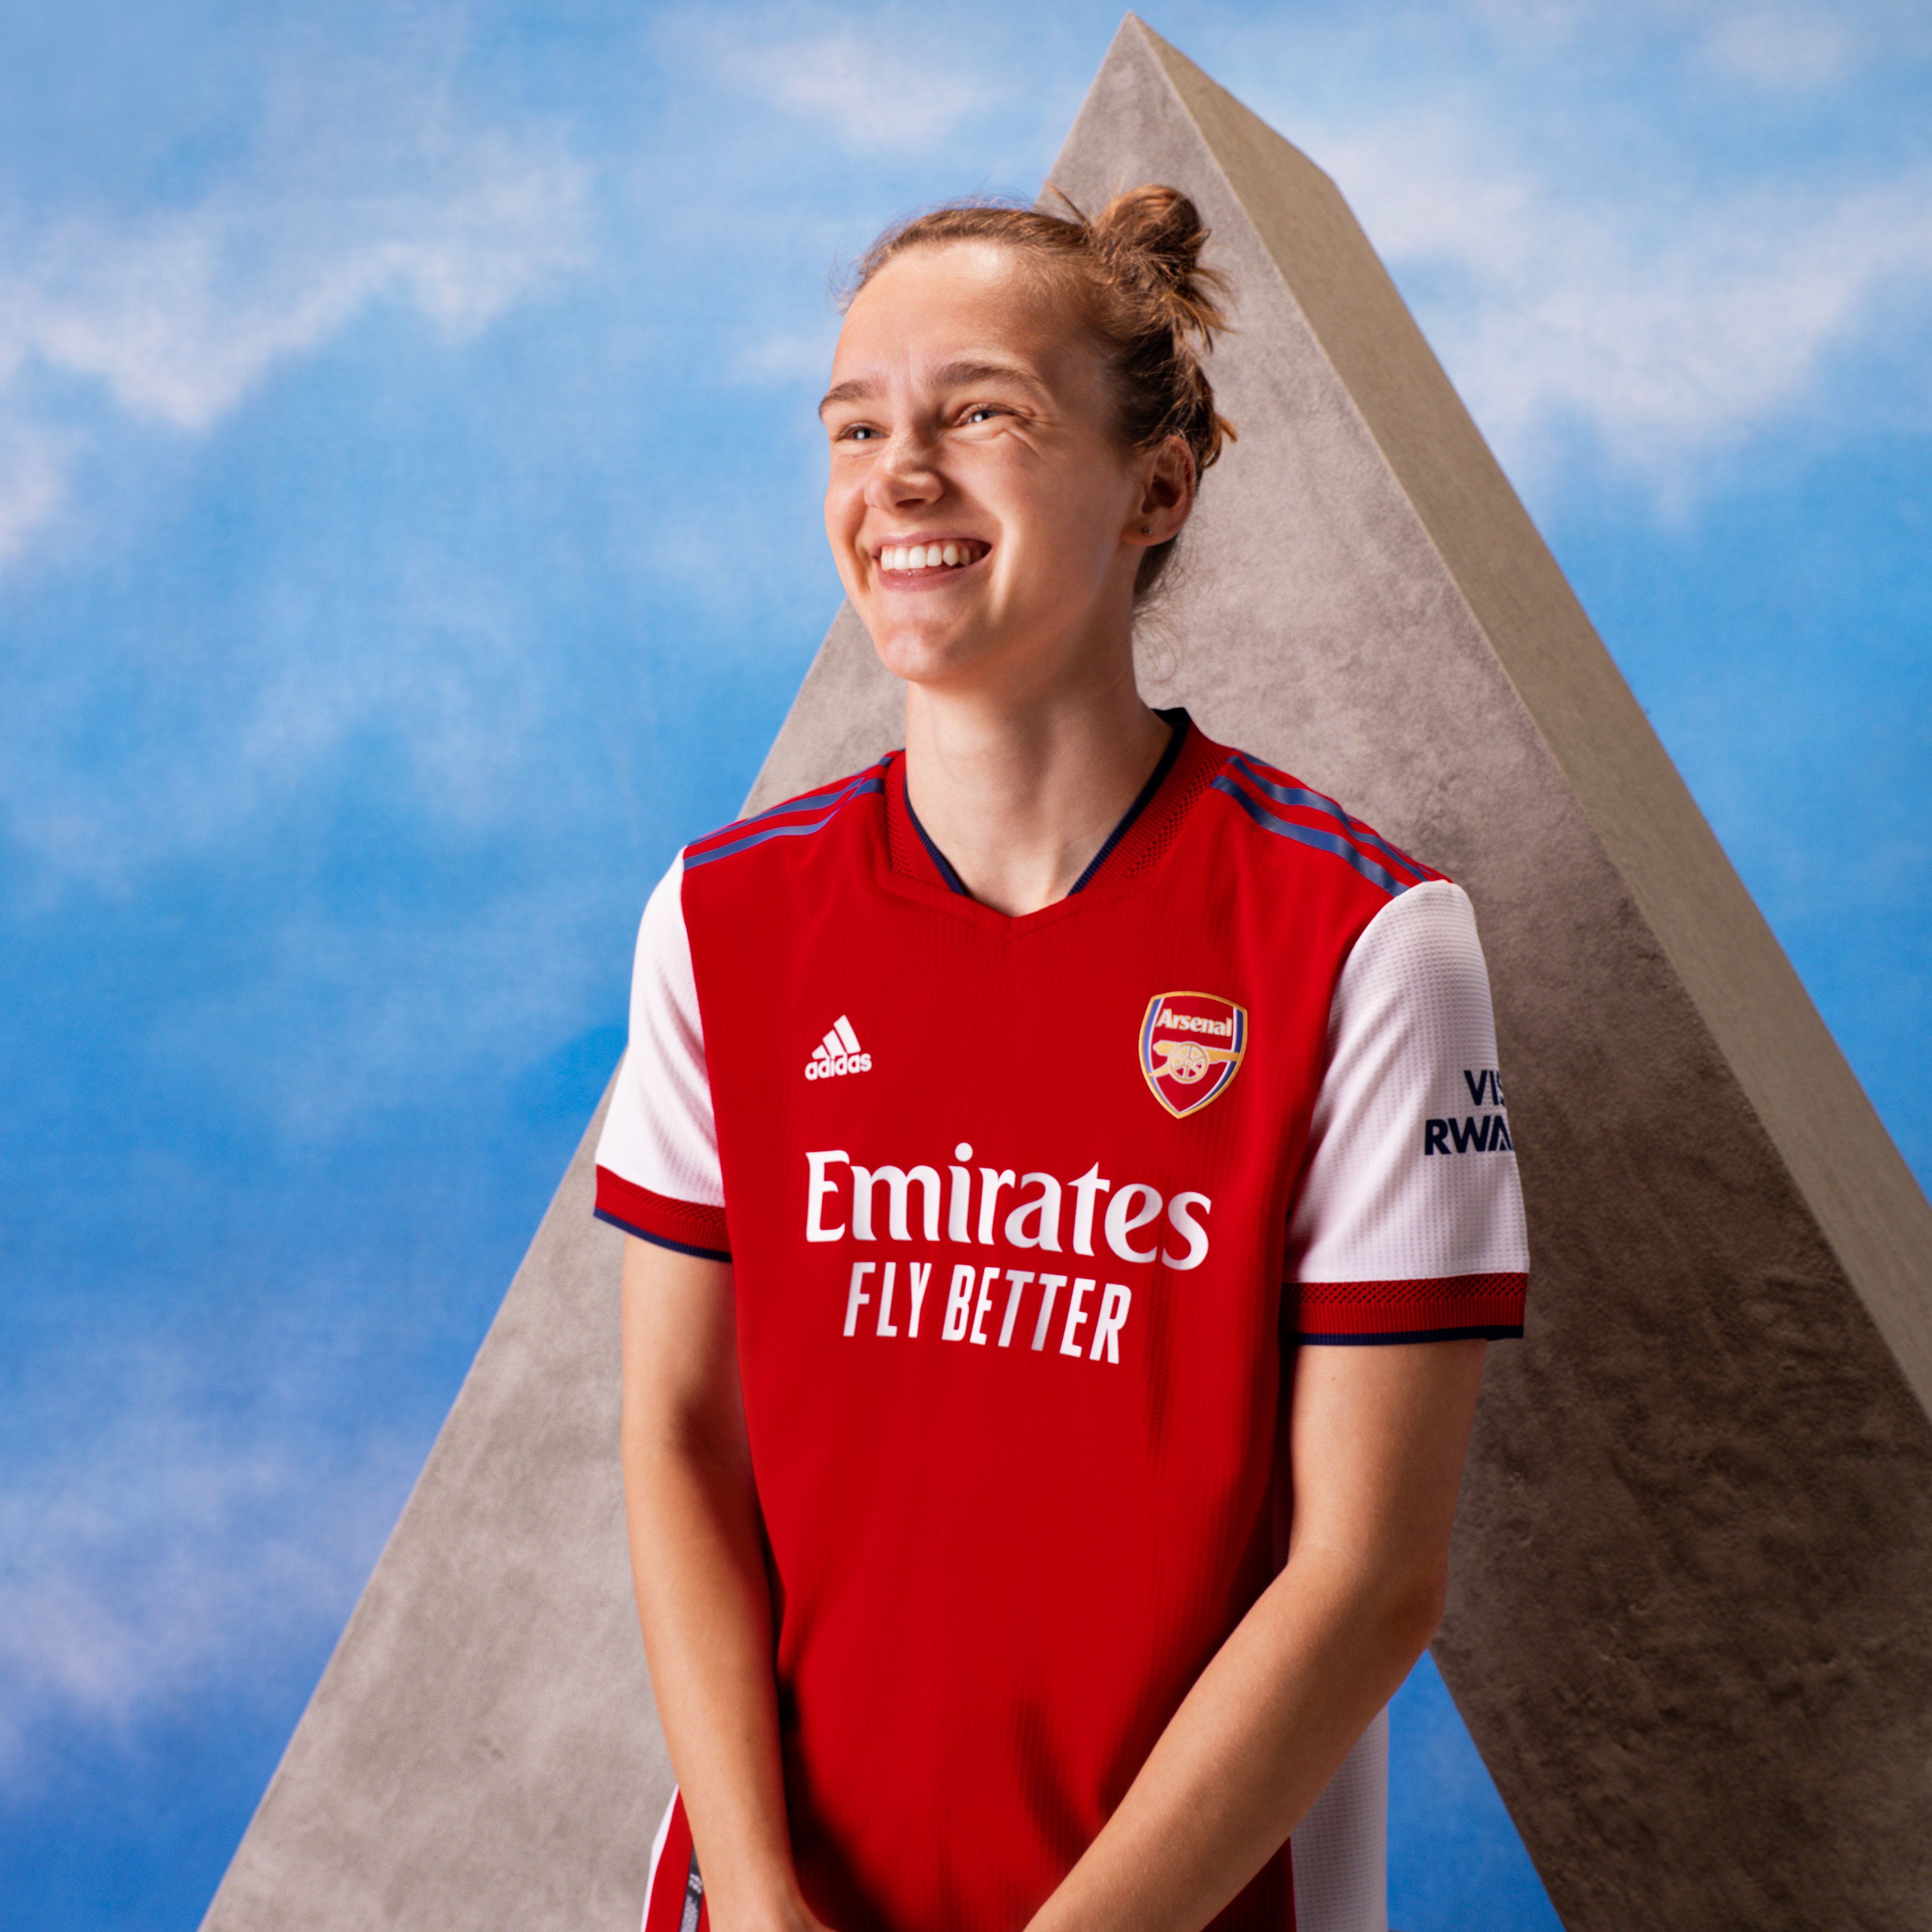 adidas UK en Twitter: "Where we belong. Introducing the new @Arsenal home jersey for 2021/2022, exclusively now through adidas official club https://t.co/z7DIRovT4A https://t.co/zCyIYDDsDT" / Twitter